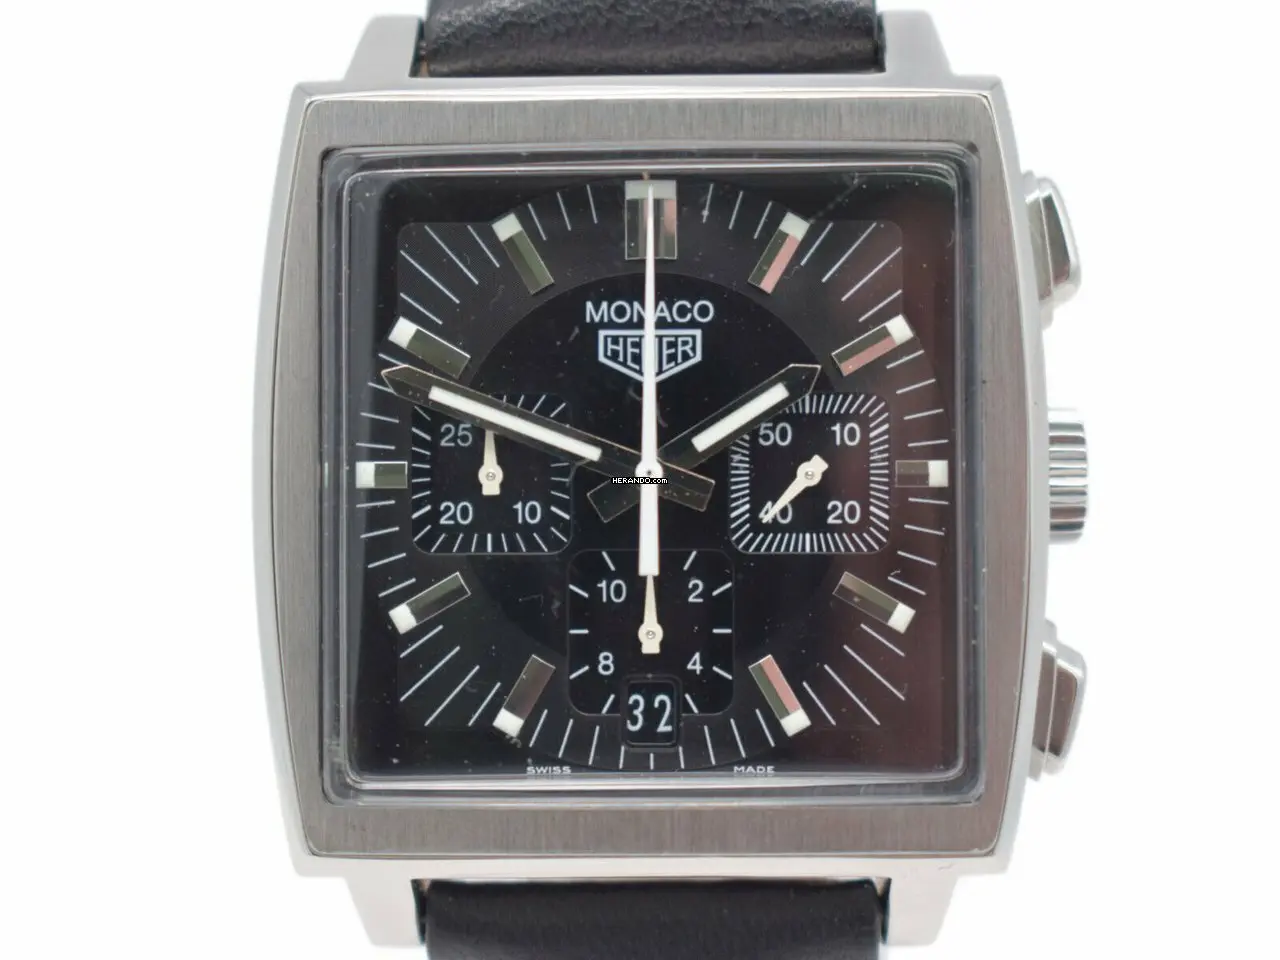 watches-336281-29318107-kktser46ck54ud95ukn3f2oi-ExtraLarge.webp